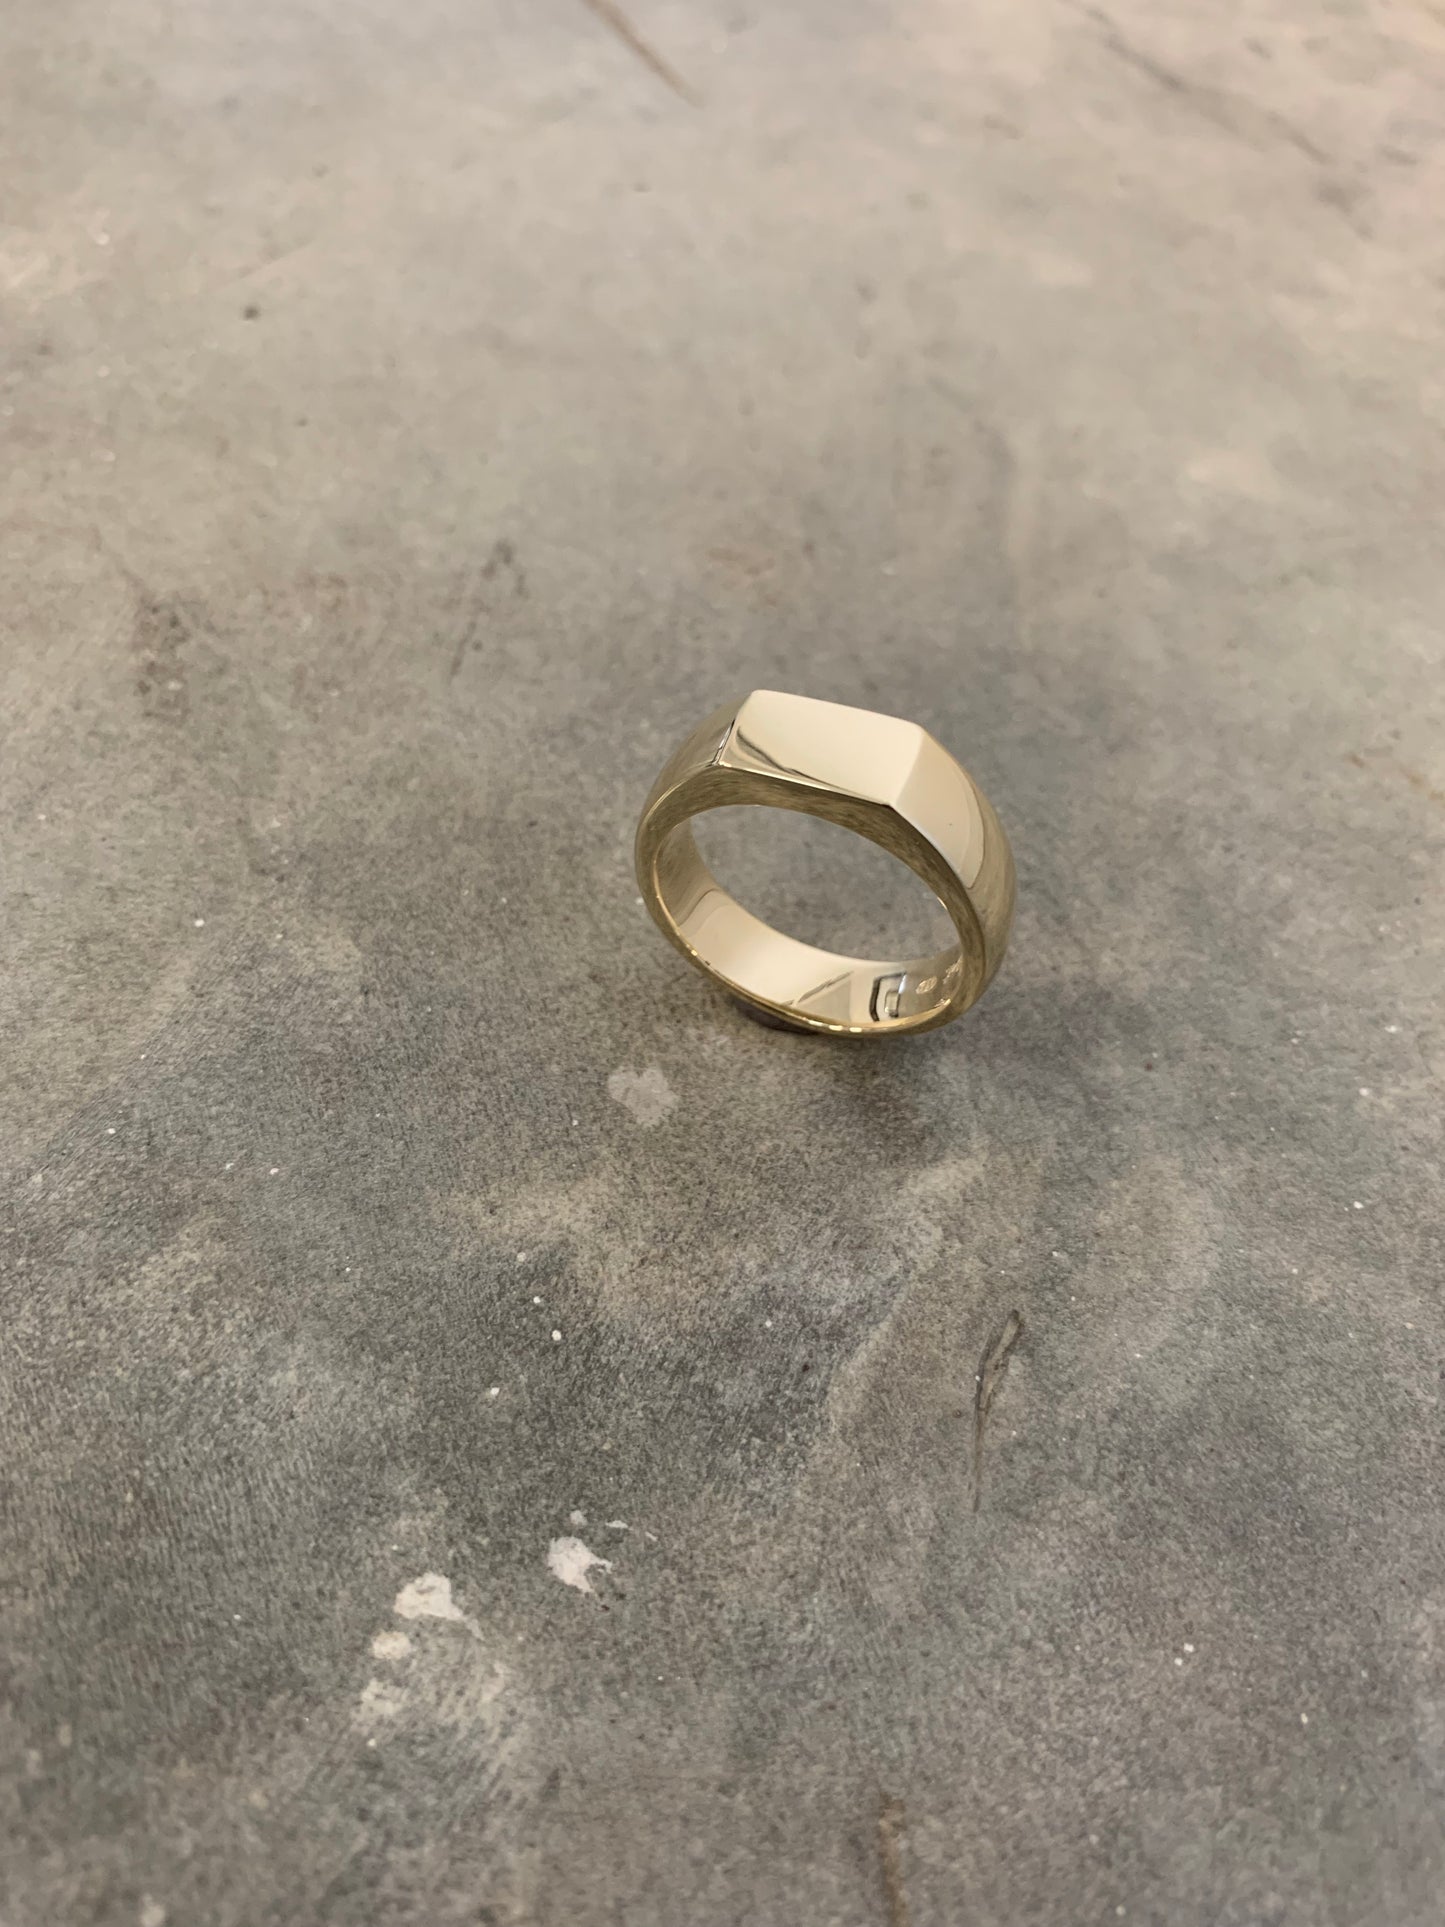 Gold Old Fashioned Ring